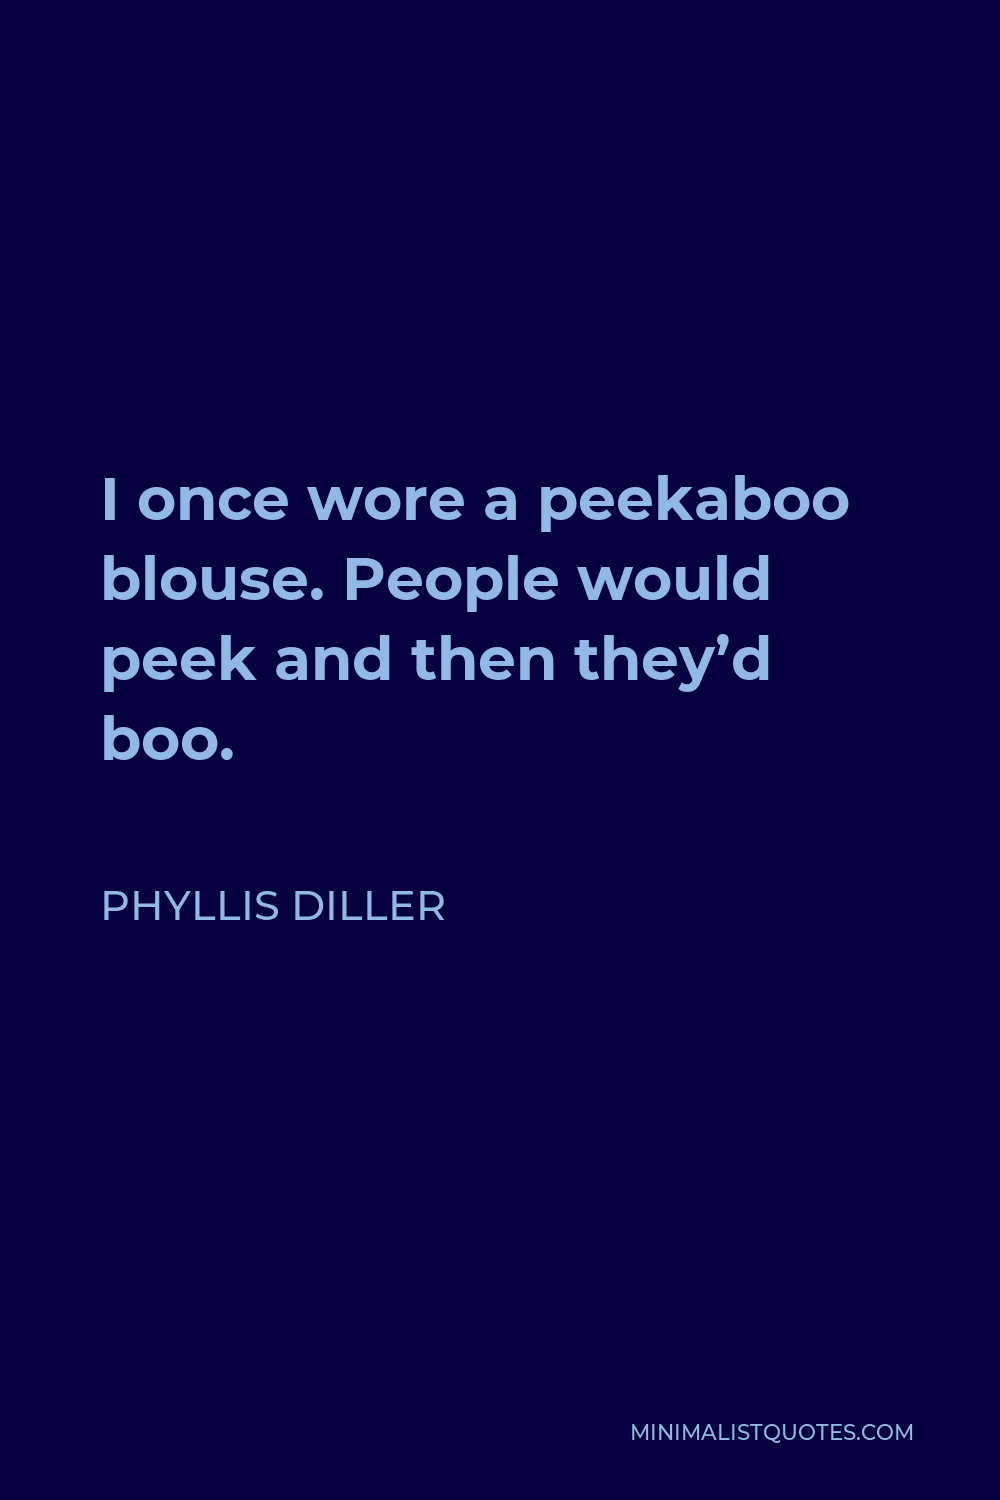 Phyllis Diller Quote - I once wore a peekaboo blouse. People would peek and then they’d boo.